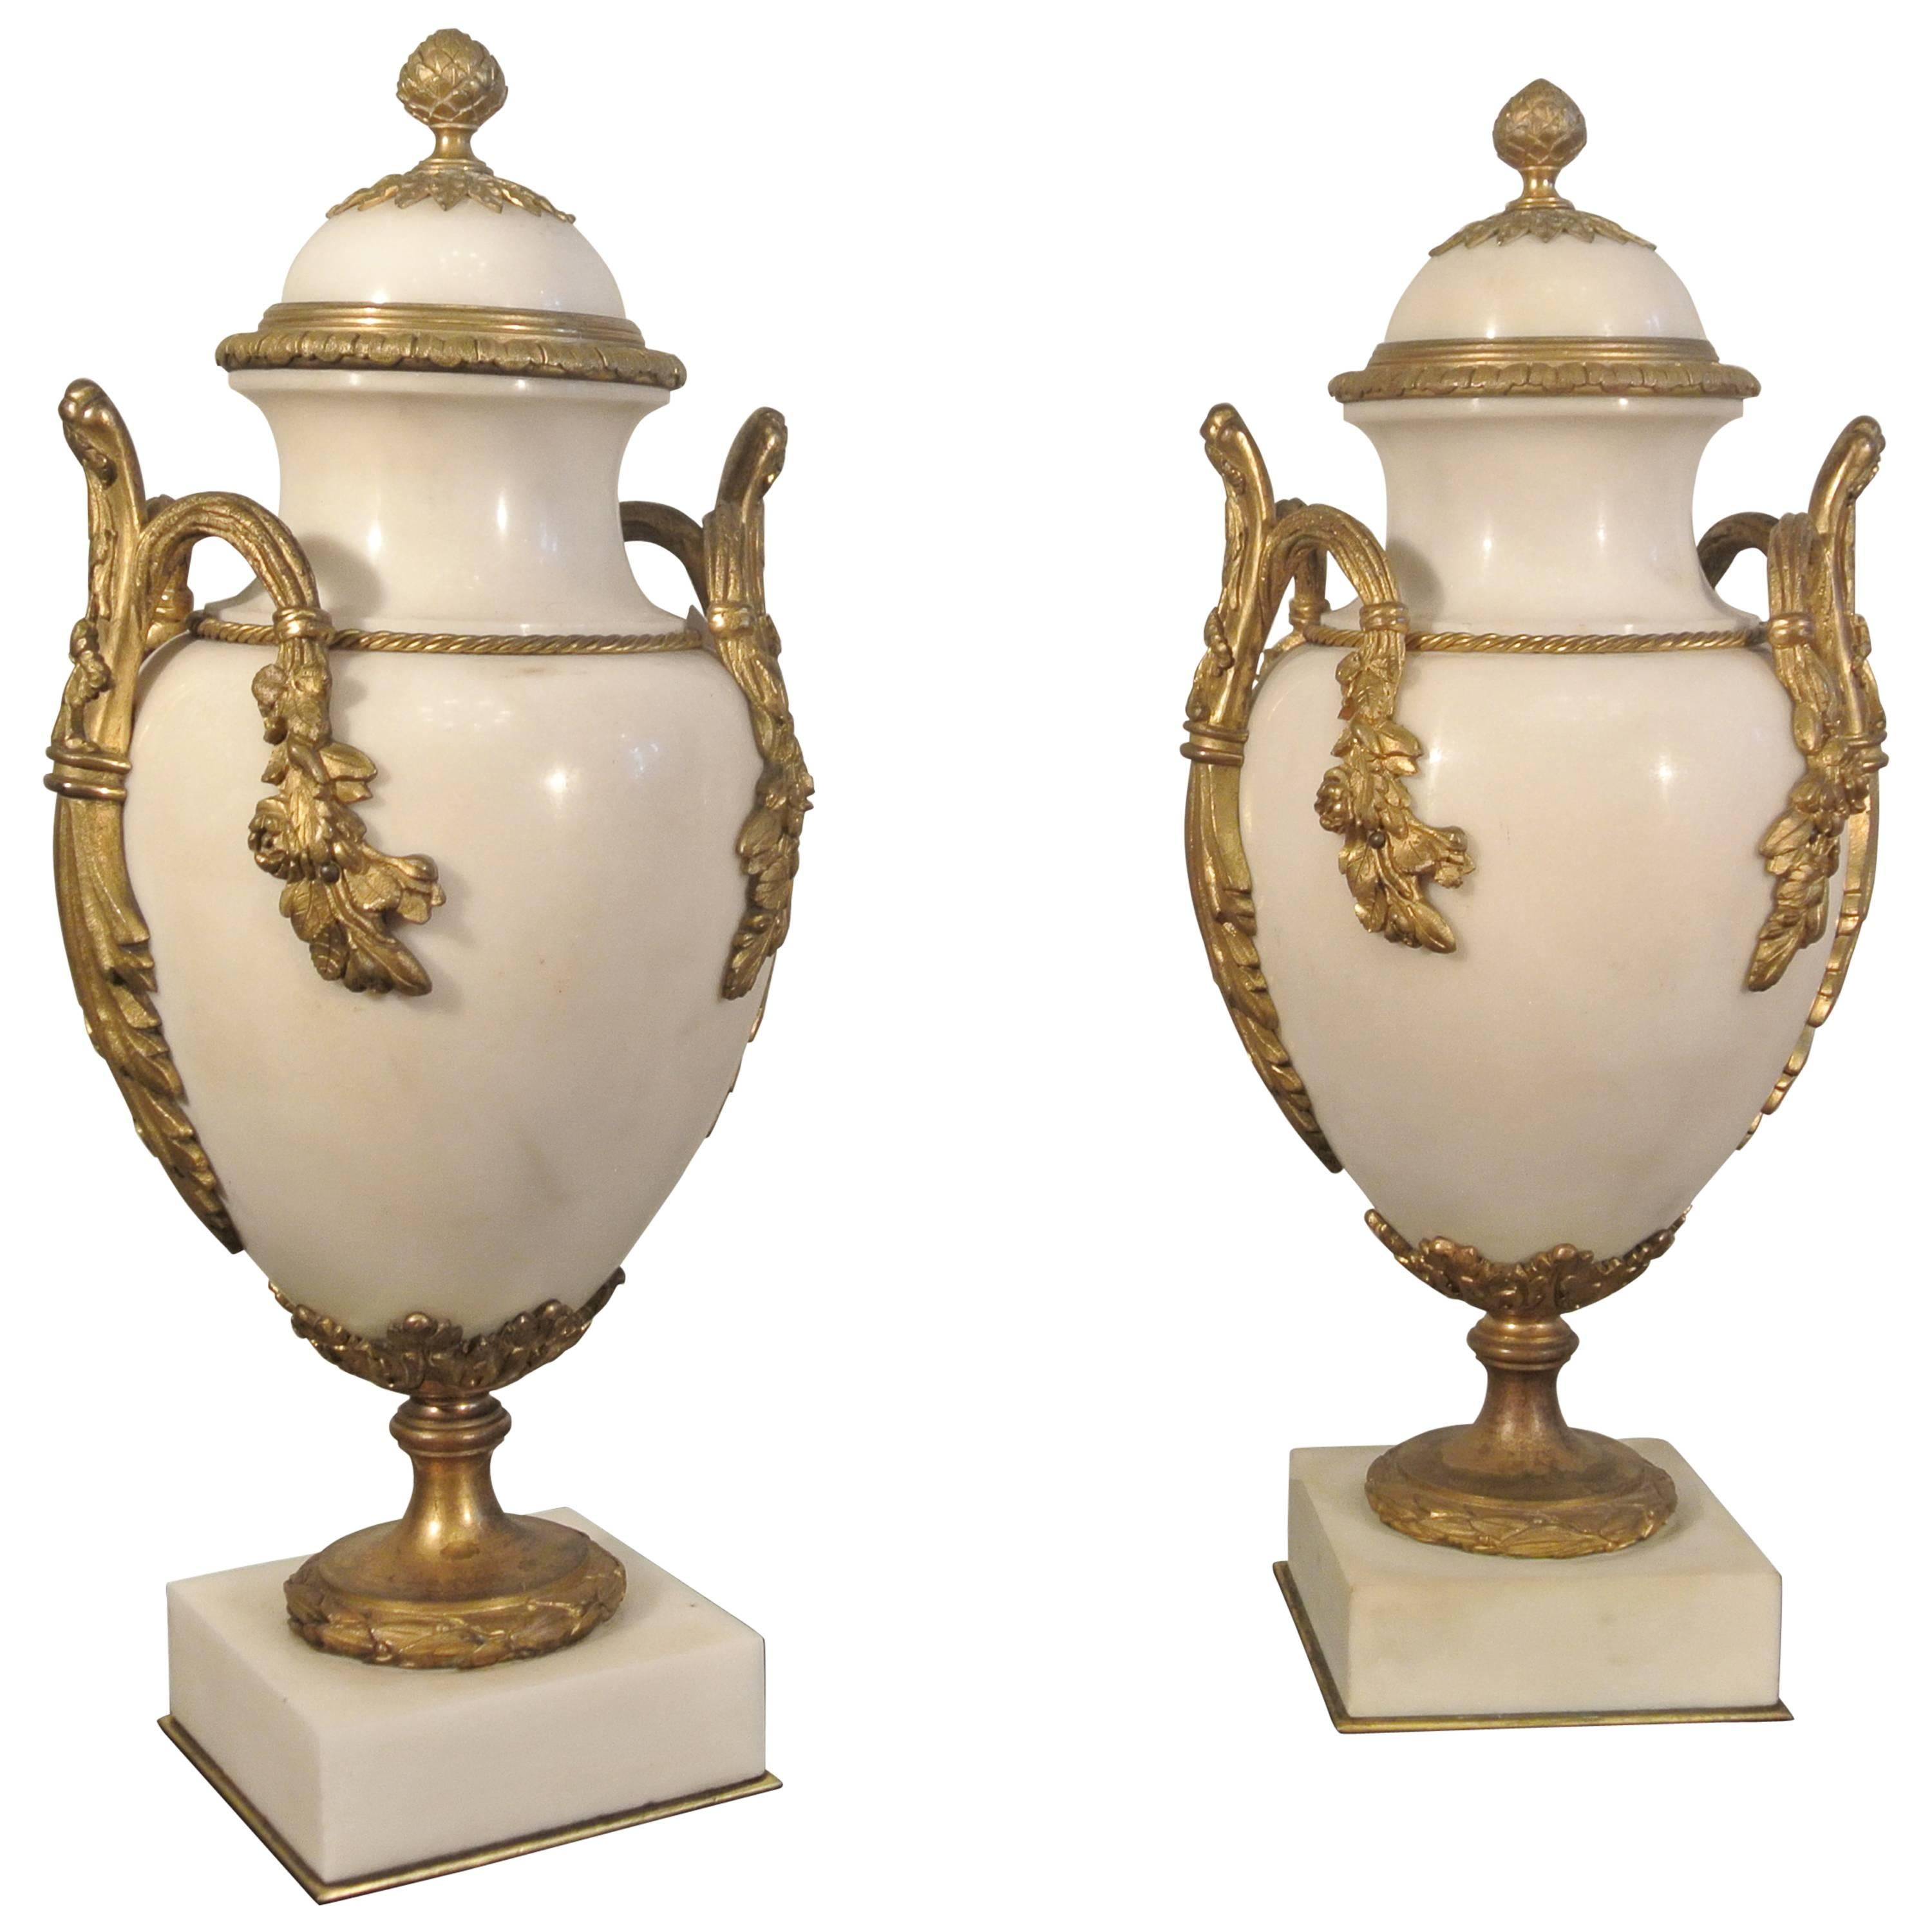 Pair of White Marble Jars with Gold Gilded Bronze Mounts, 19th Century